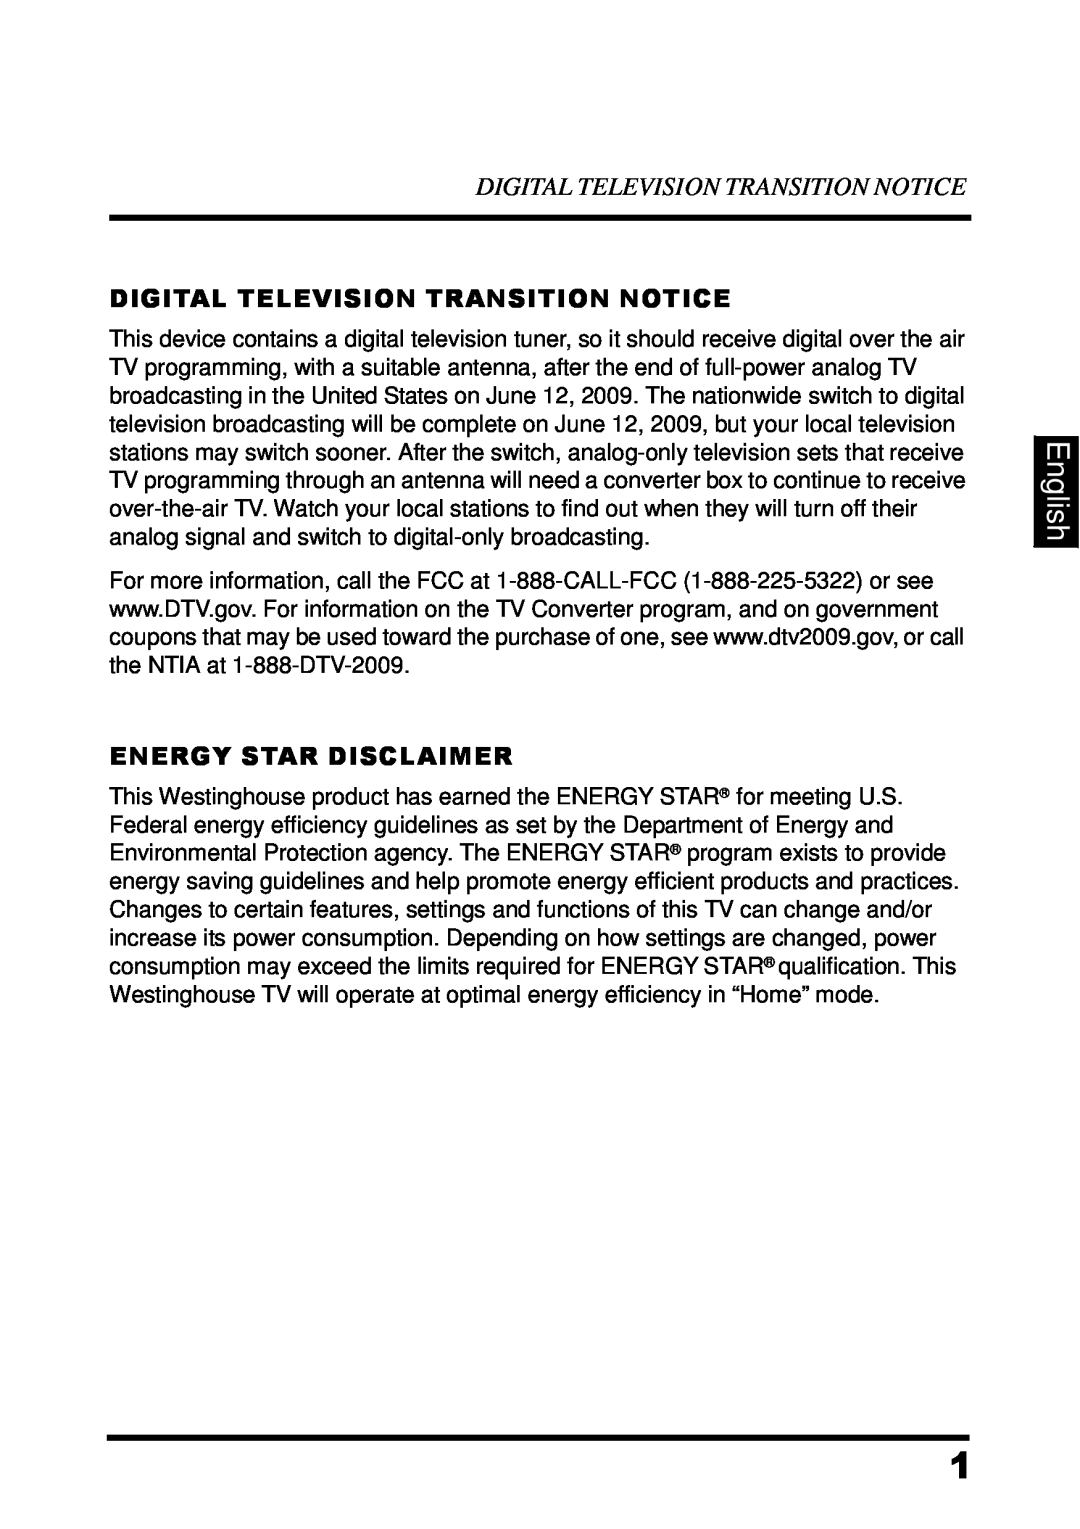 Westinghouse UW48T7HW manual English, Digital Television Transition Notice, Energy Star Disclaimer 